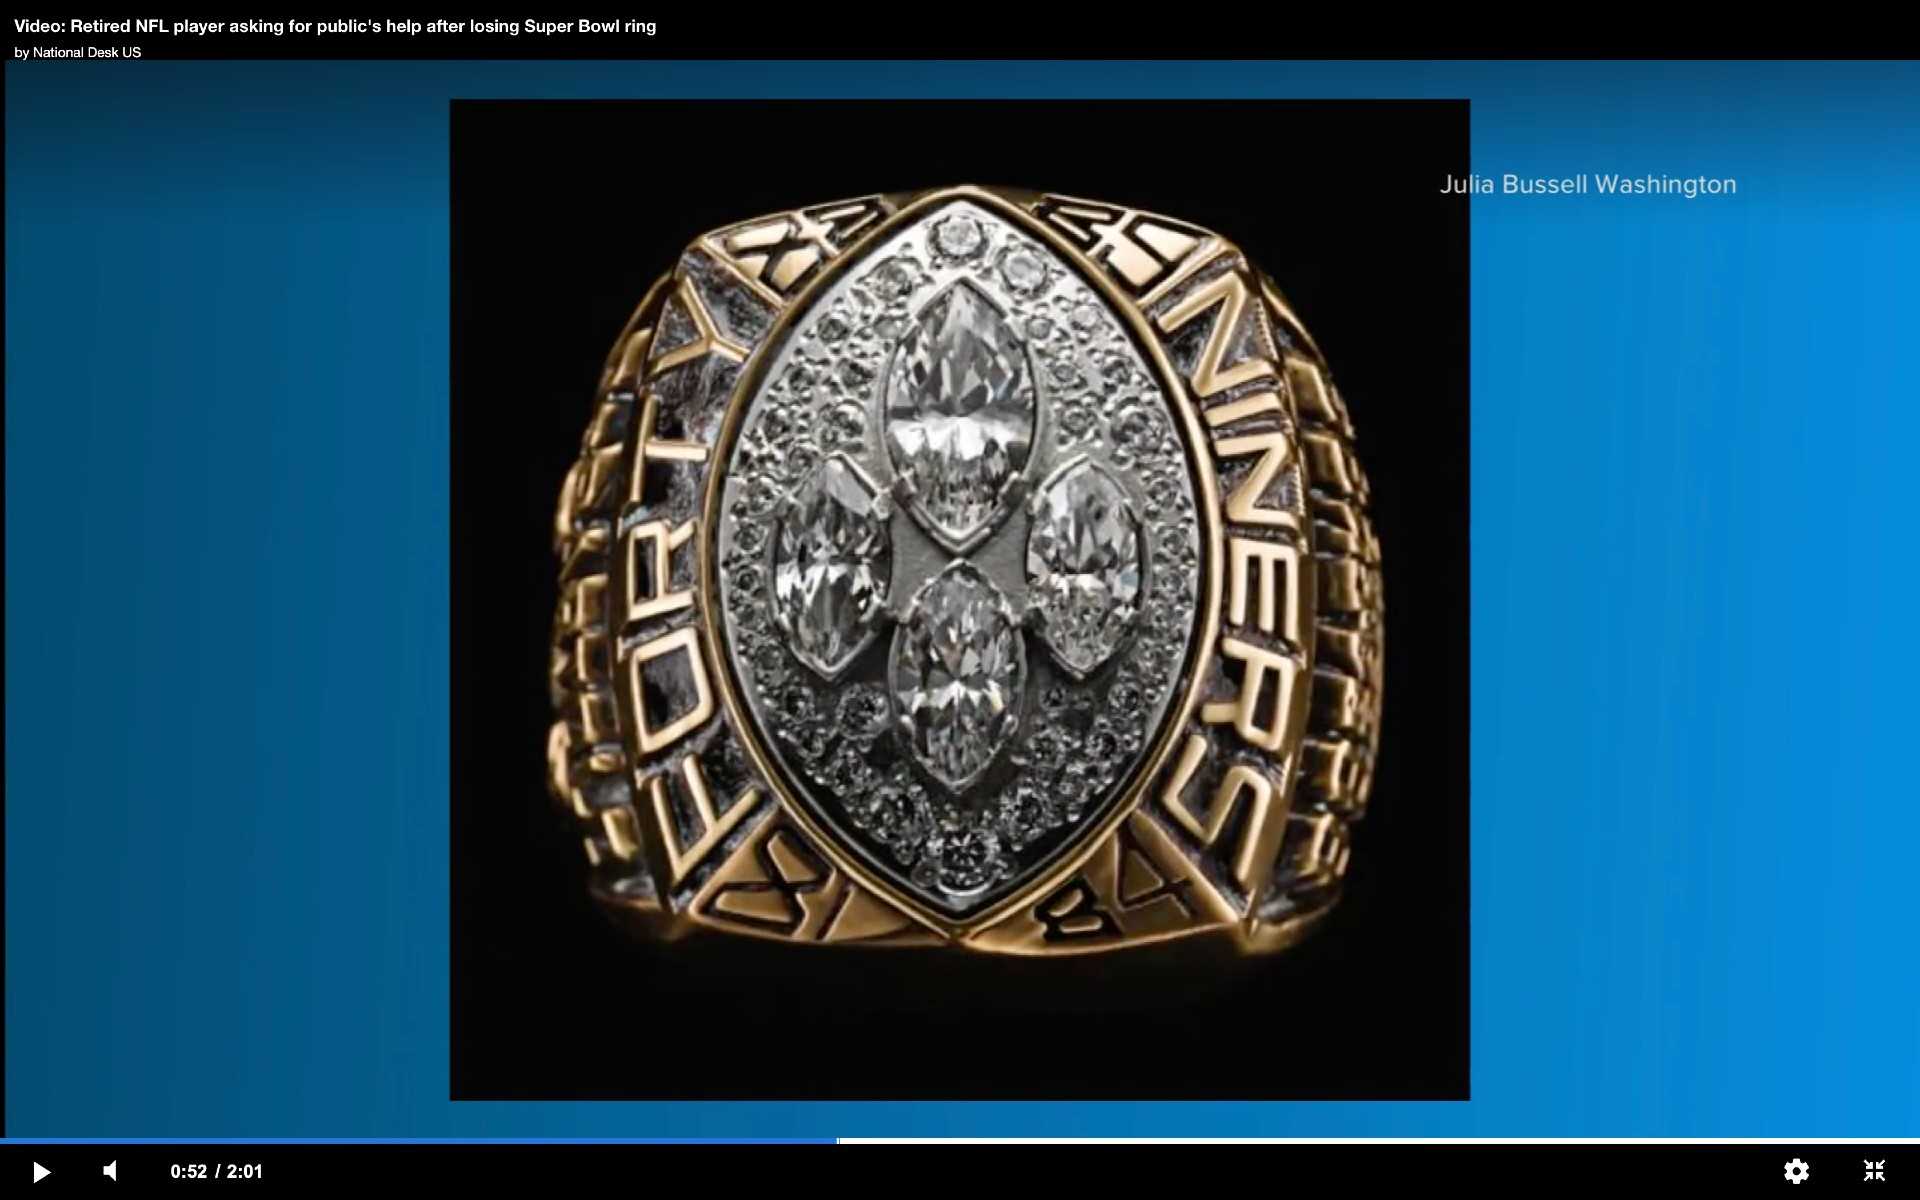 More than 100 phony replica Super Bowl rings found